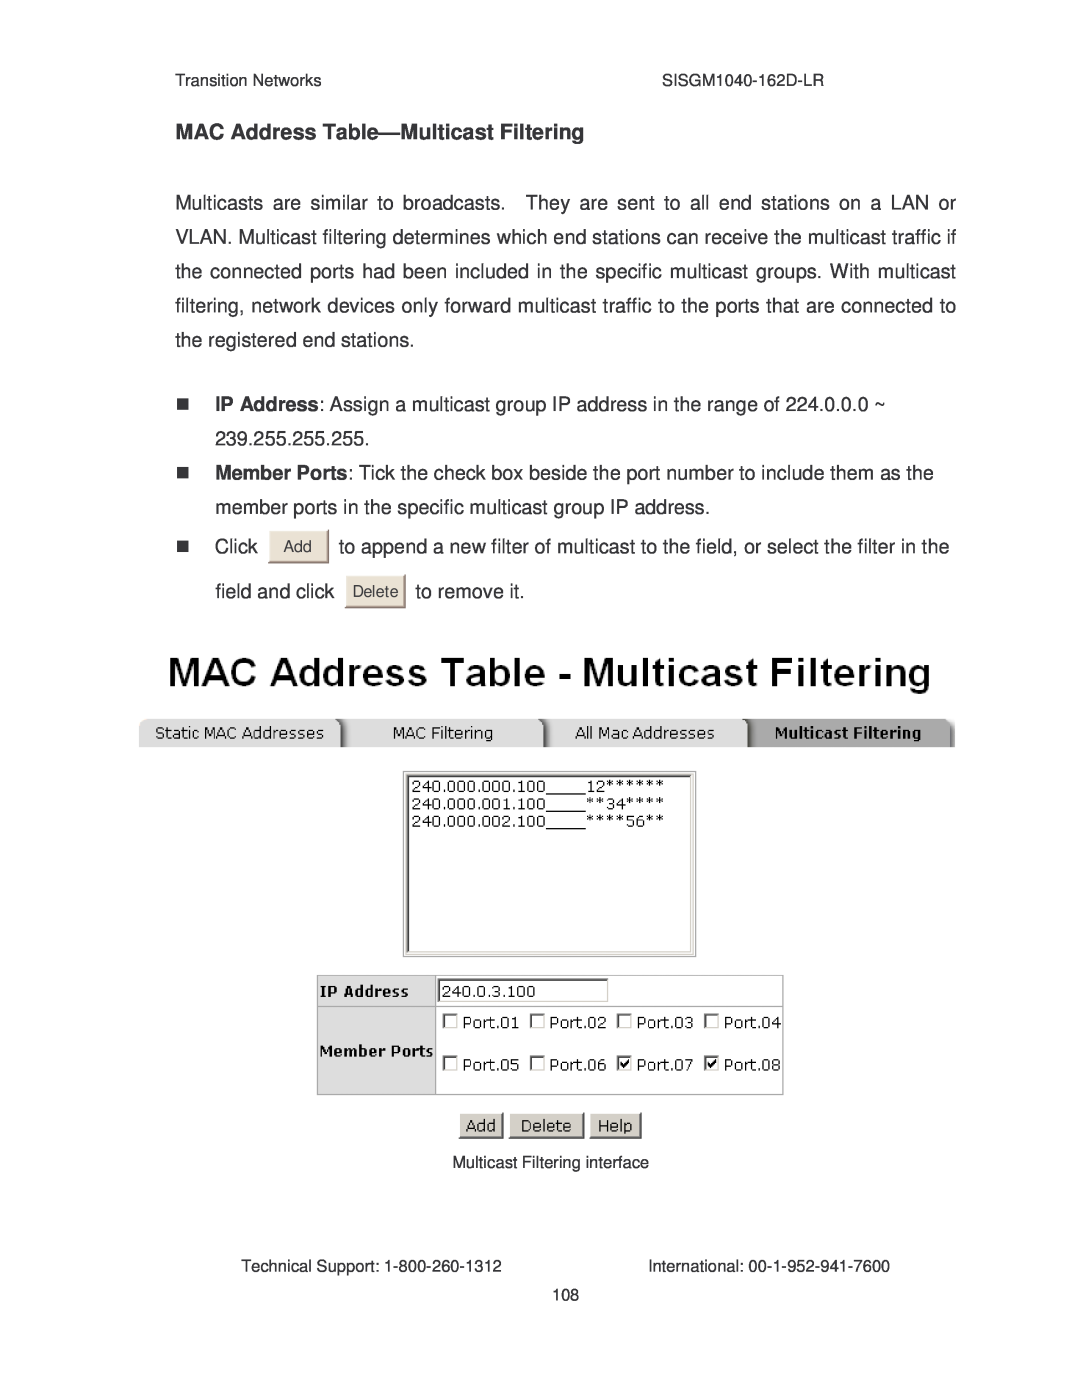 Transition Networks SISGM1040-162D manual MAC Address Table-Multicast Filtering 